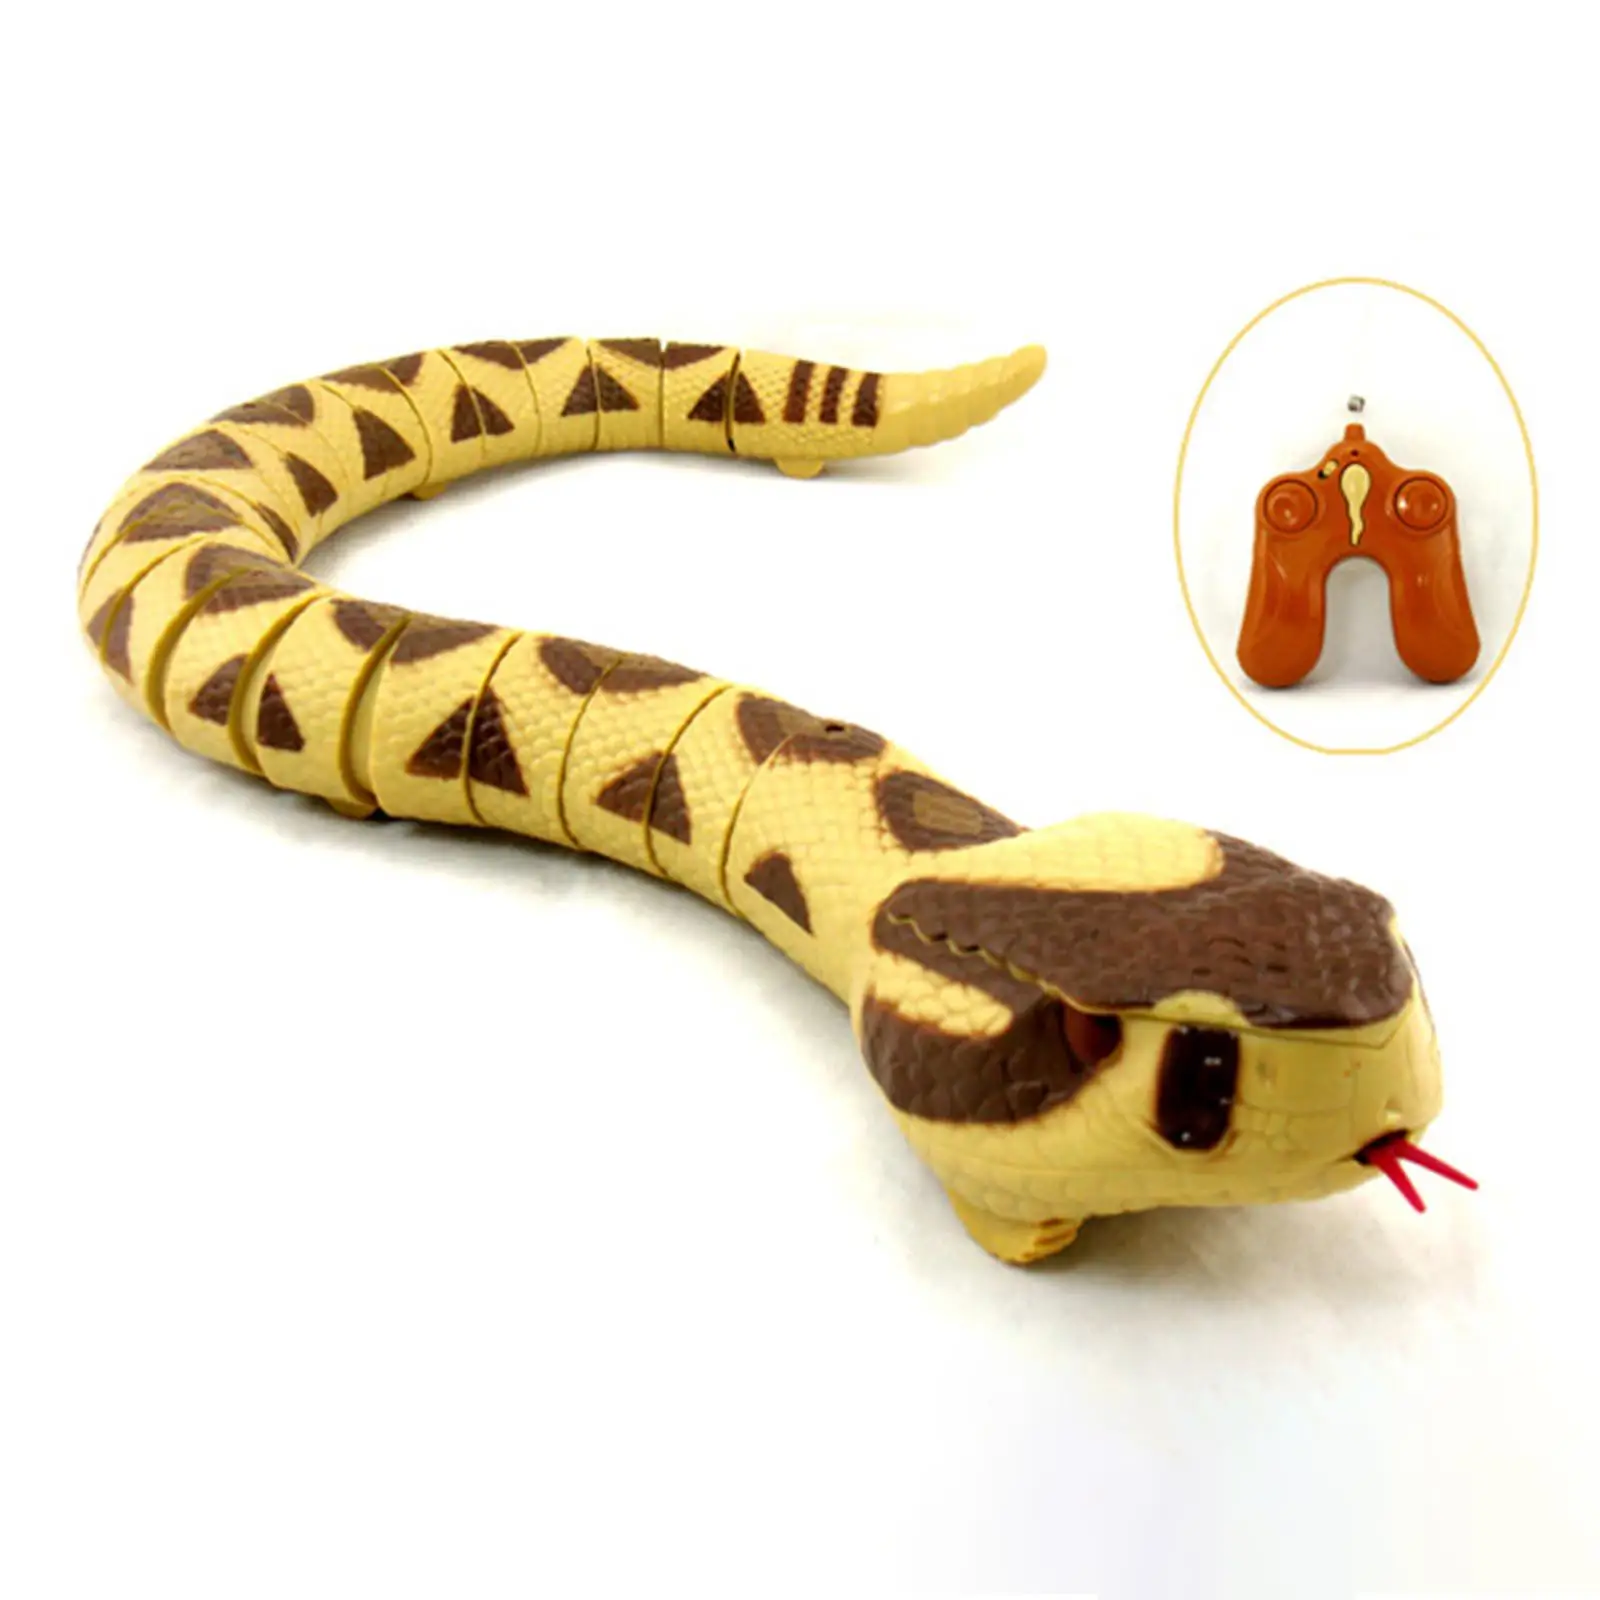 Lifelike RC Snake Toys Halloween Tricks Toy Artifical Snake Model Party Favors for Party Tricks Tabletop Decors Jokes